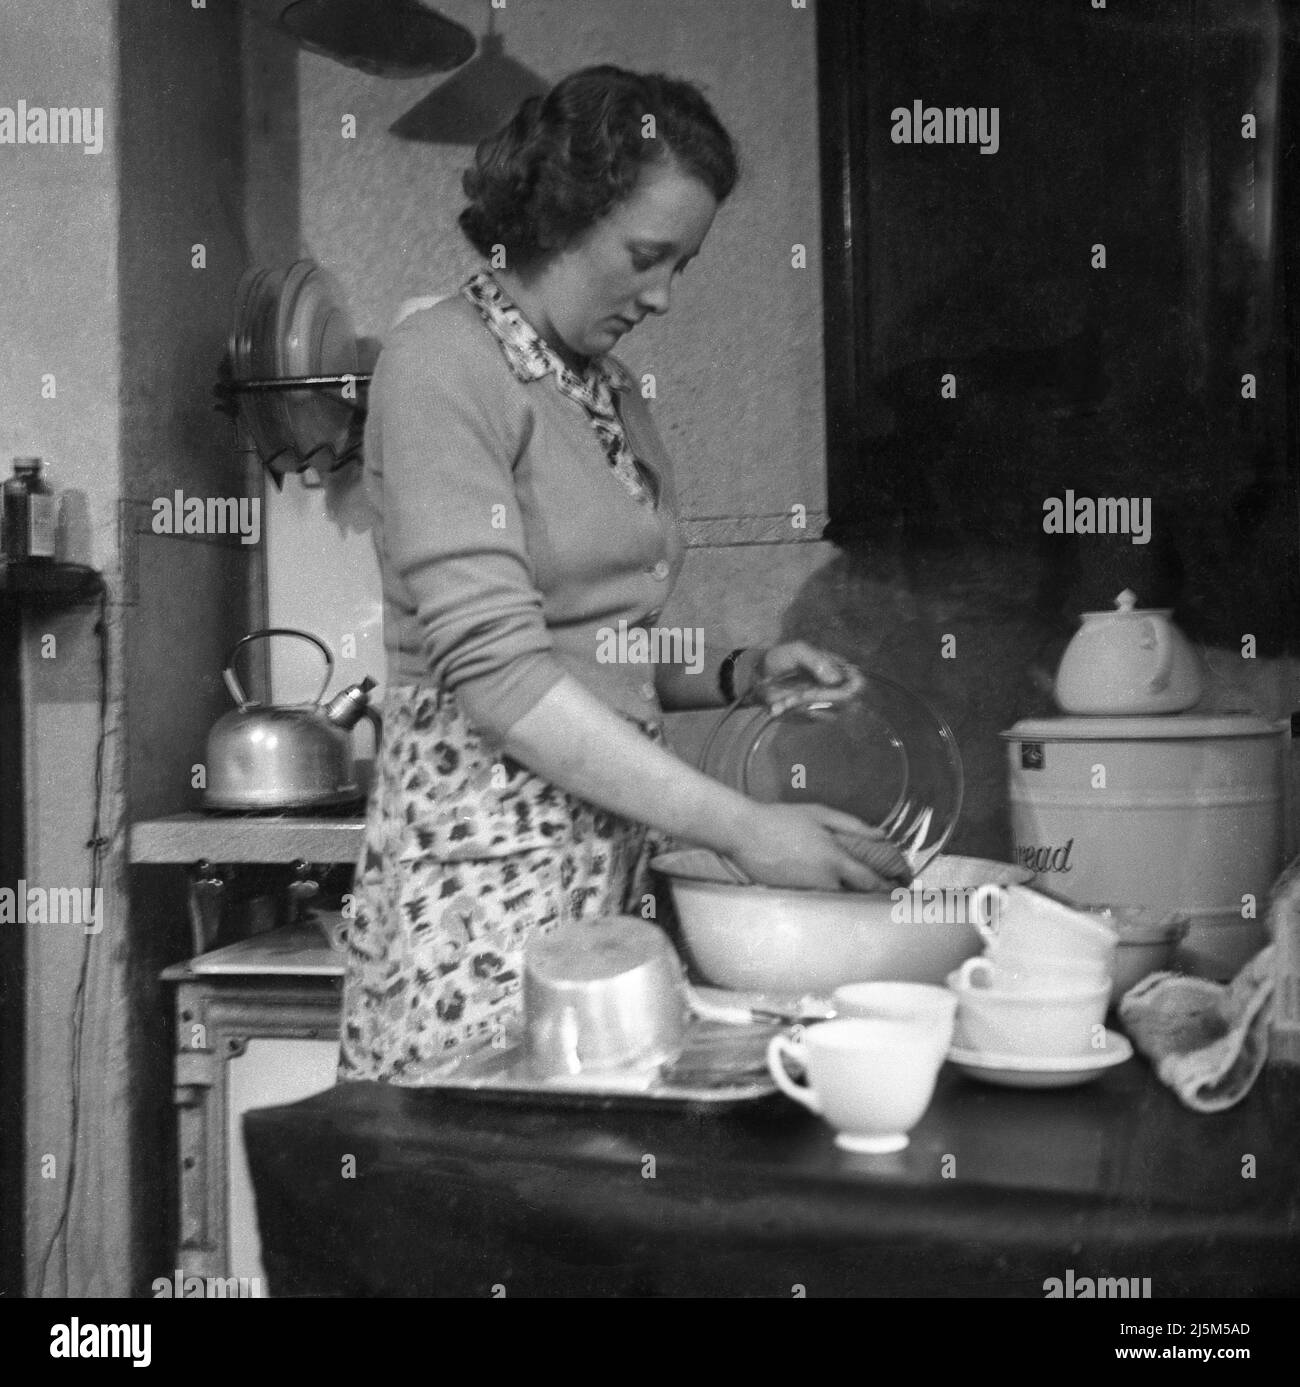 1950s, historical, a woman in a kitchen of the era washing a pryex glass bowl, Stockport, Manchester, England, UK. Stock Photo